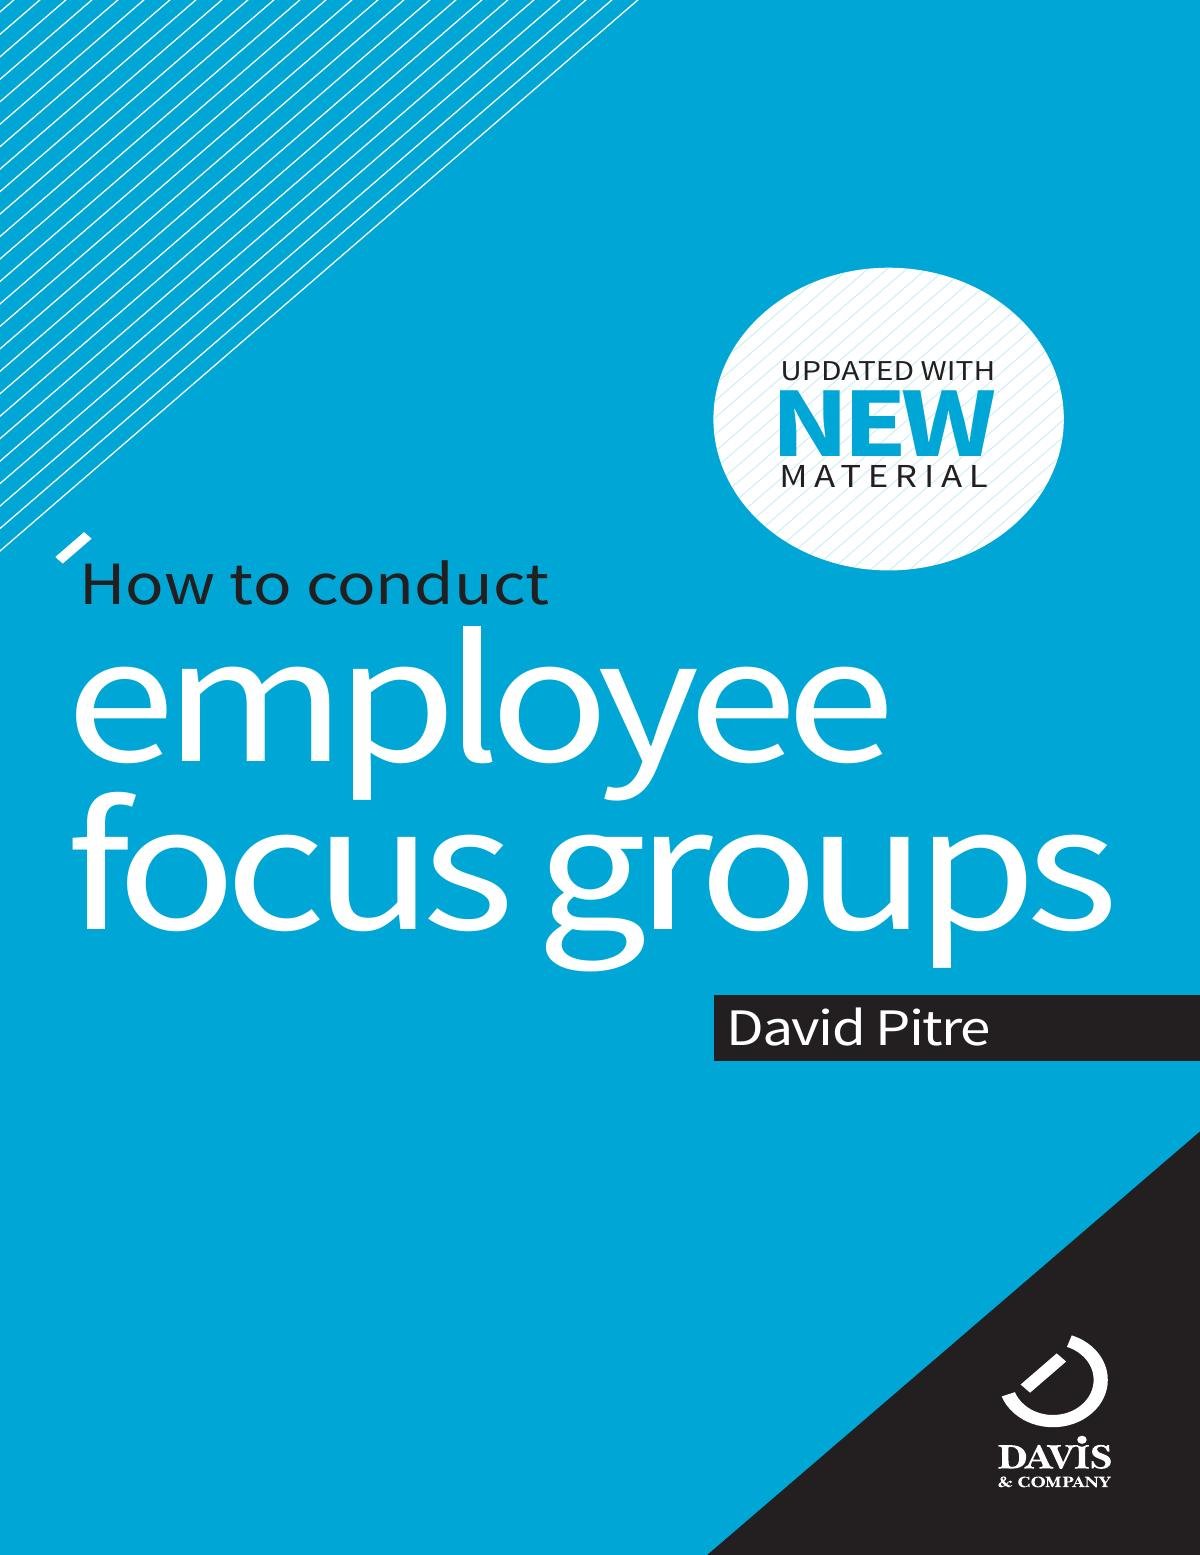 How to conduct employee focus groups